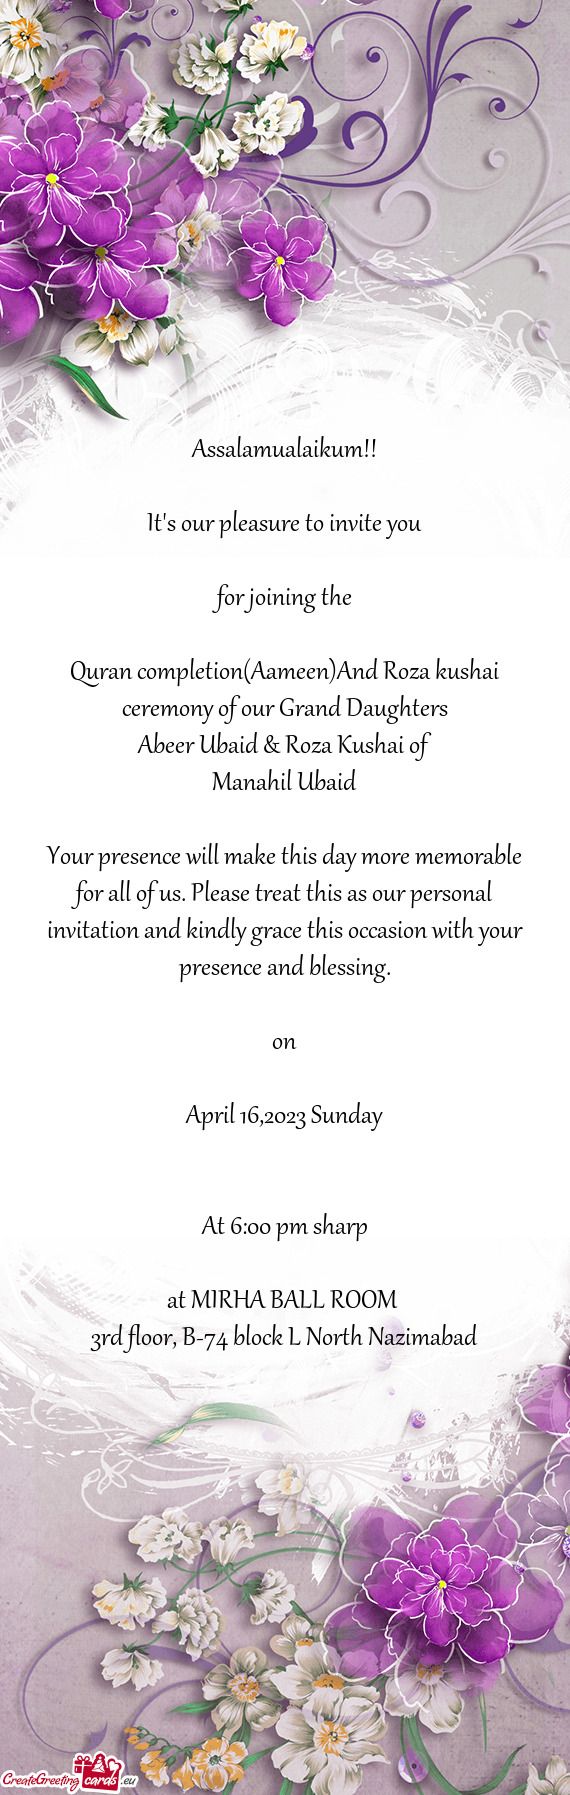 Quran completion(Aameen)And Roza kushai ceremony of our Grand Daughters